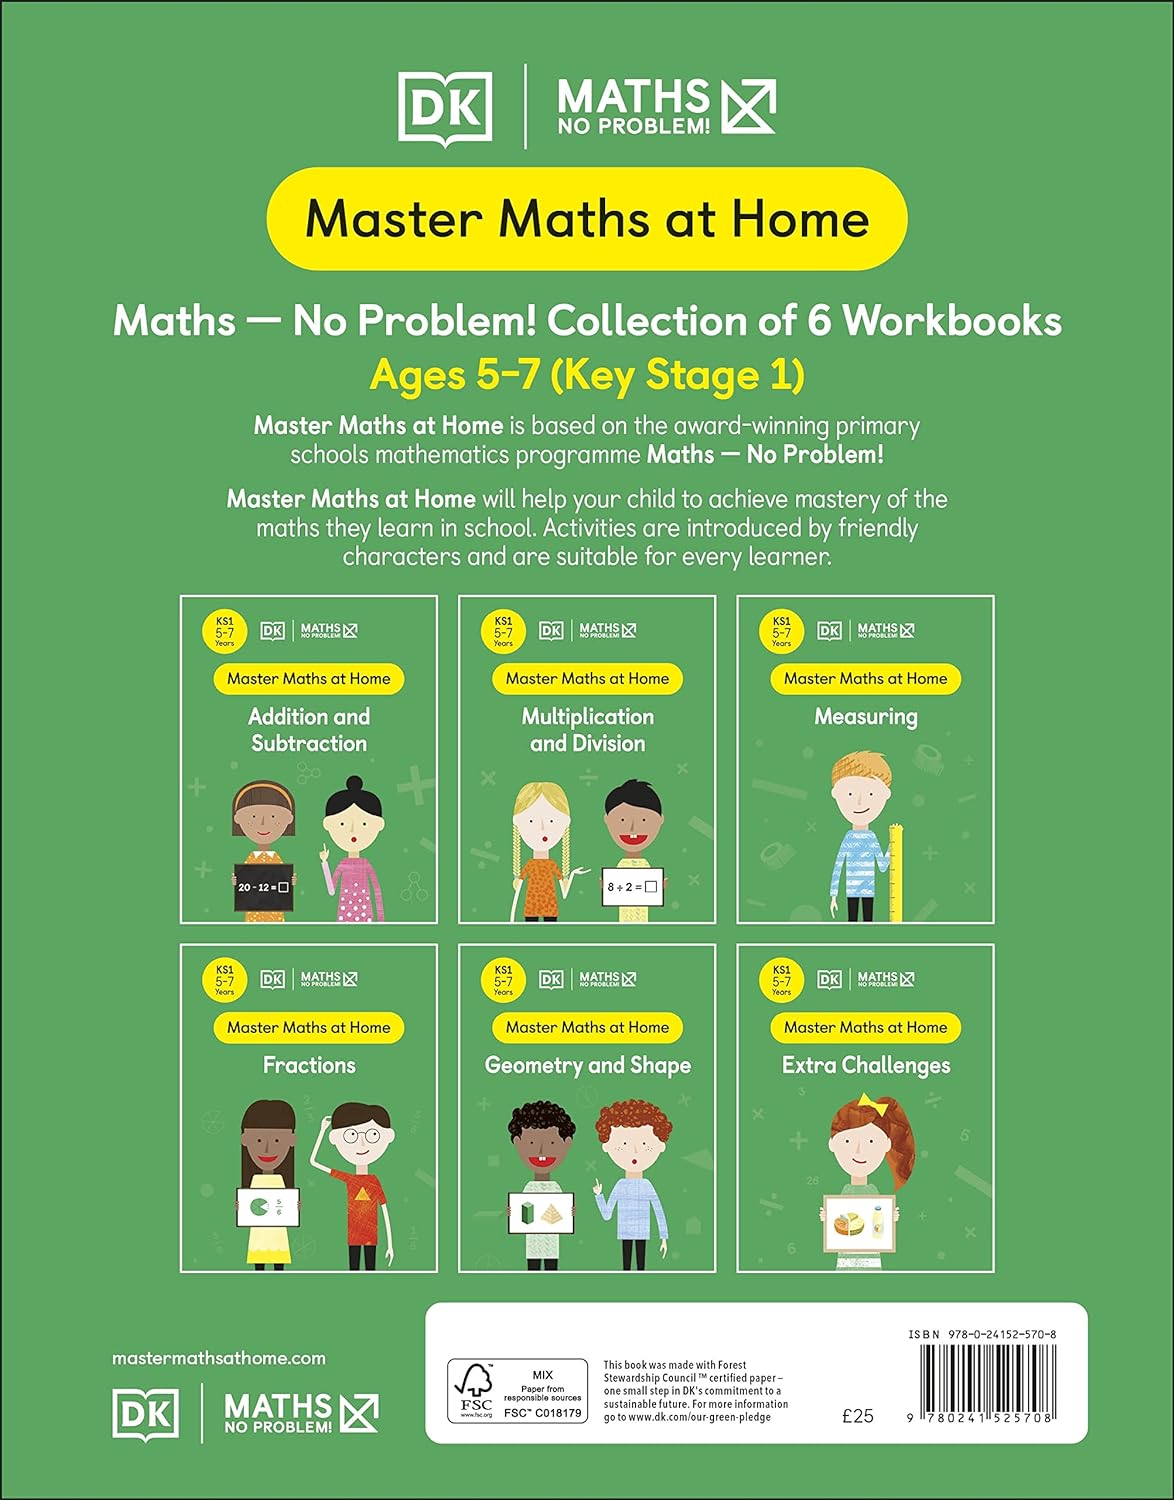 Maths ― No Problem! Collection Of 6 Workbooks, Ages 5-7 (Key Stage 1)